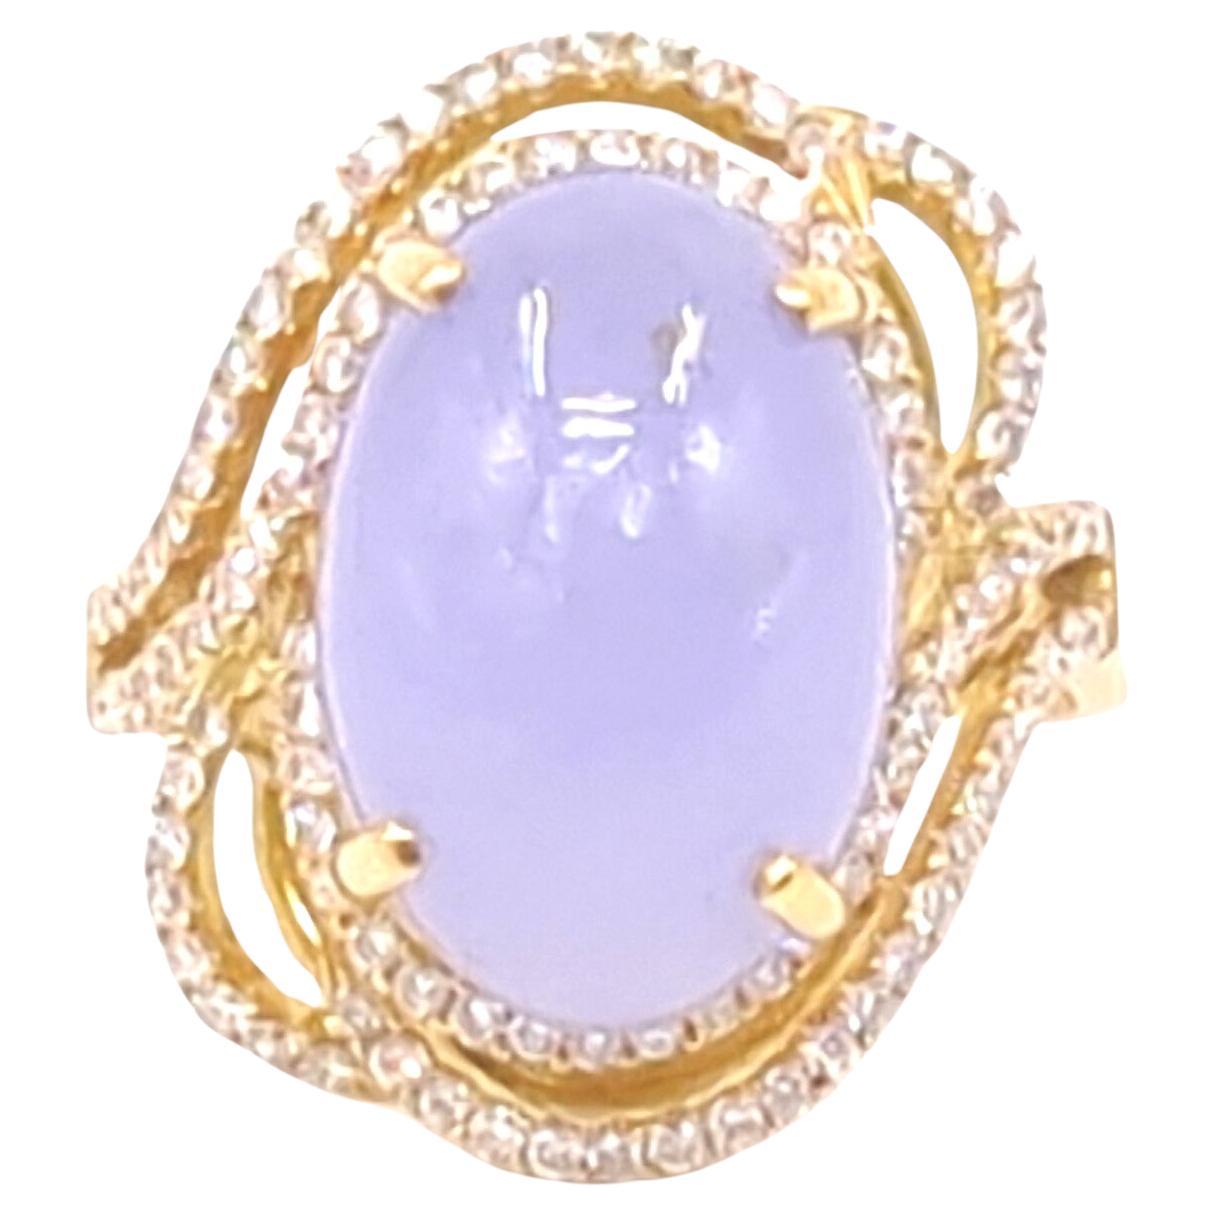 This luxurious ladies' ring, masterfully crafted in 18K rose gold, showcases an oval cabochon of lavender jadeite that is nothing short of exceptional. Certified as A-grade by the NGTC (National Gemstone Testing Center), the jadeite boasts a